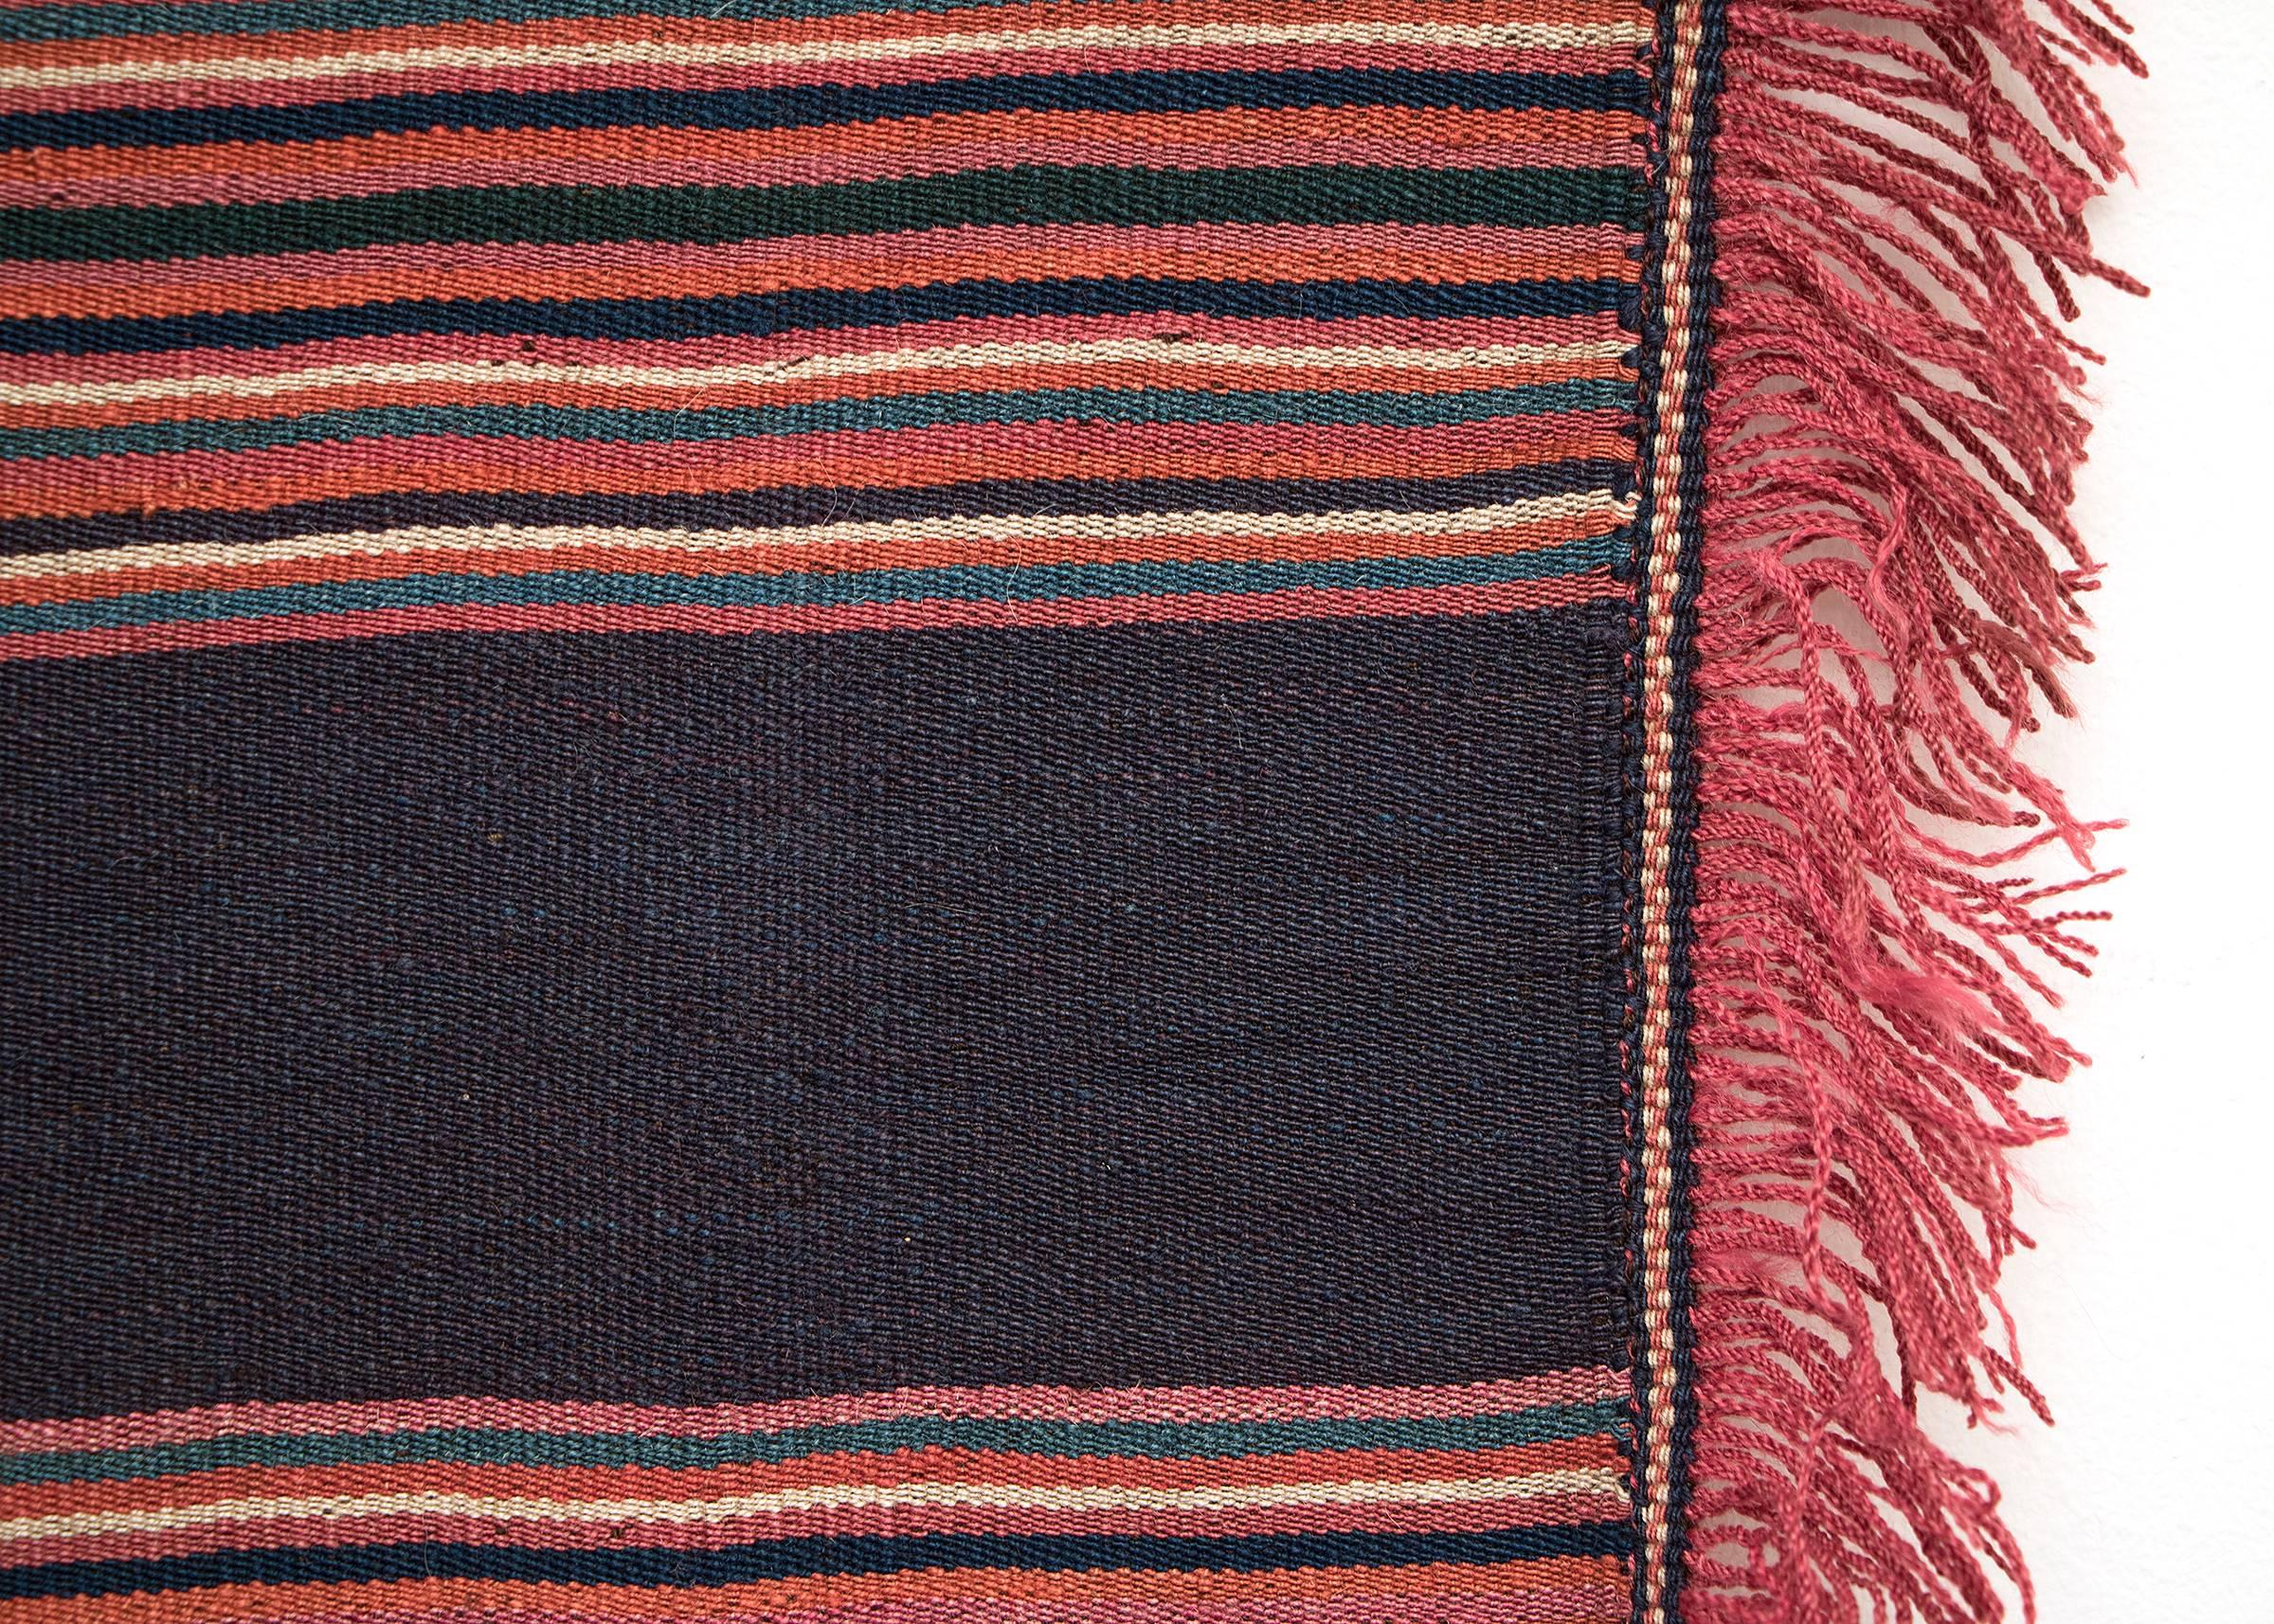  Wool Poncho woven in the mid-19th Century of Camelid Wool with natural dyes, Aymara culture, Sica Sica region, Bolivia.